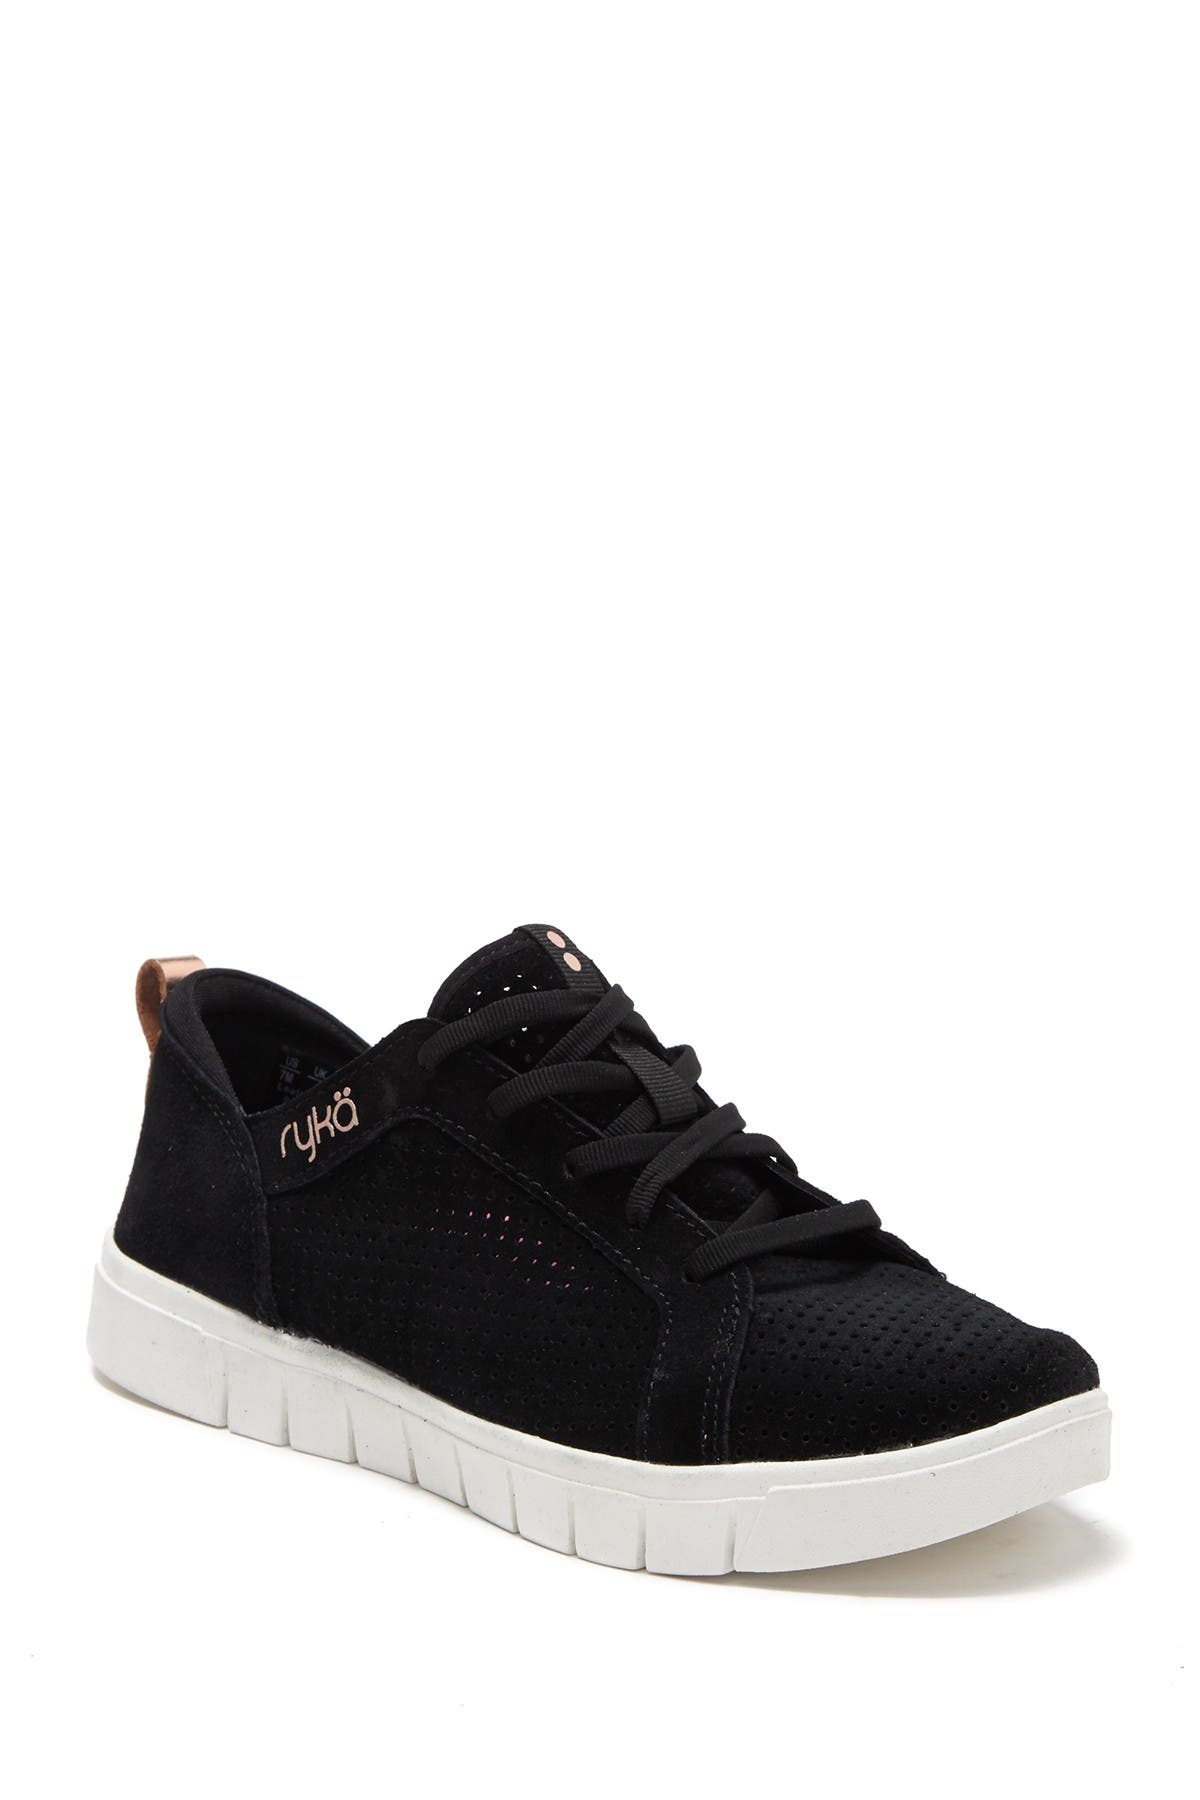 ryka leather sneakers